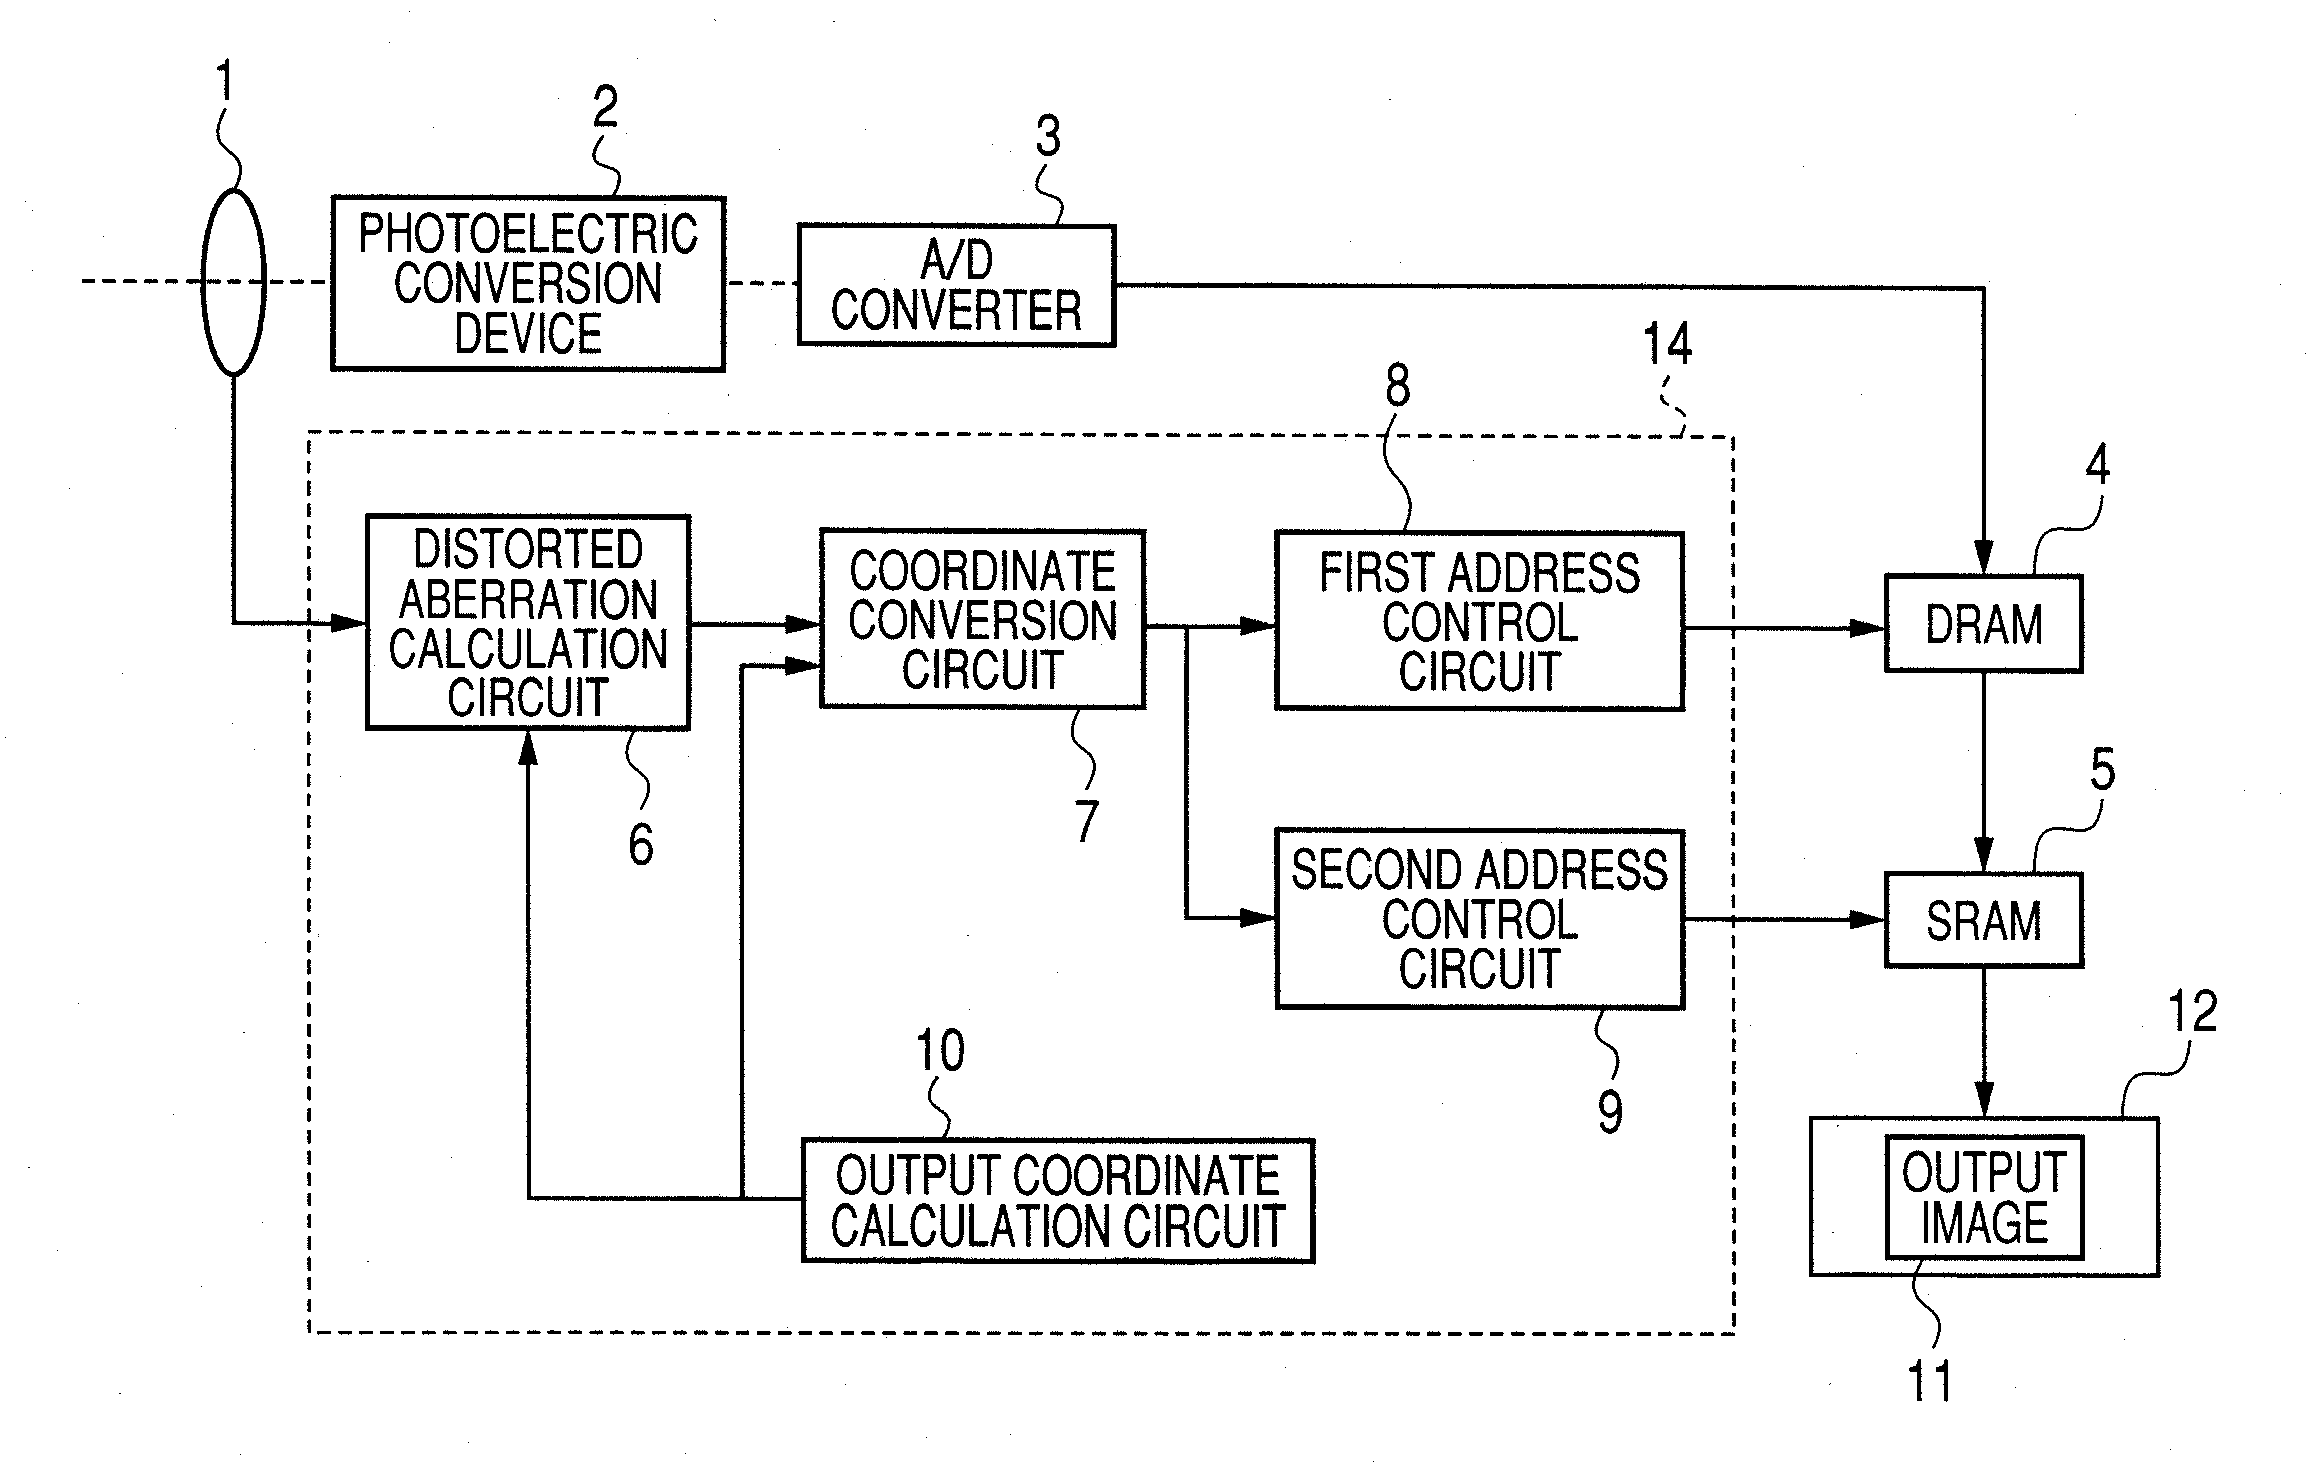 Distorted aberration correction processing apparatus